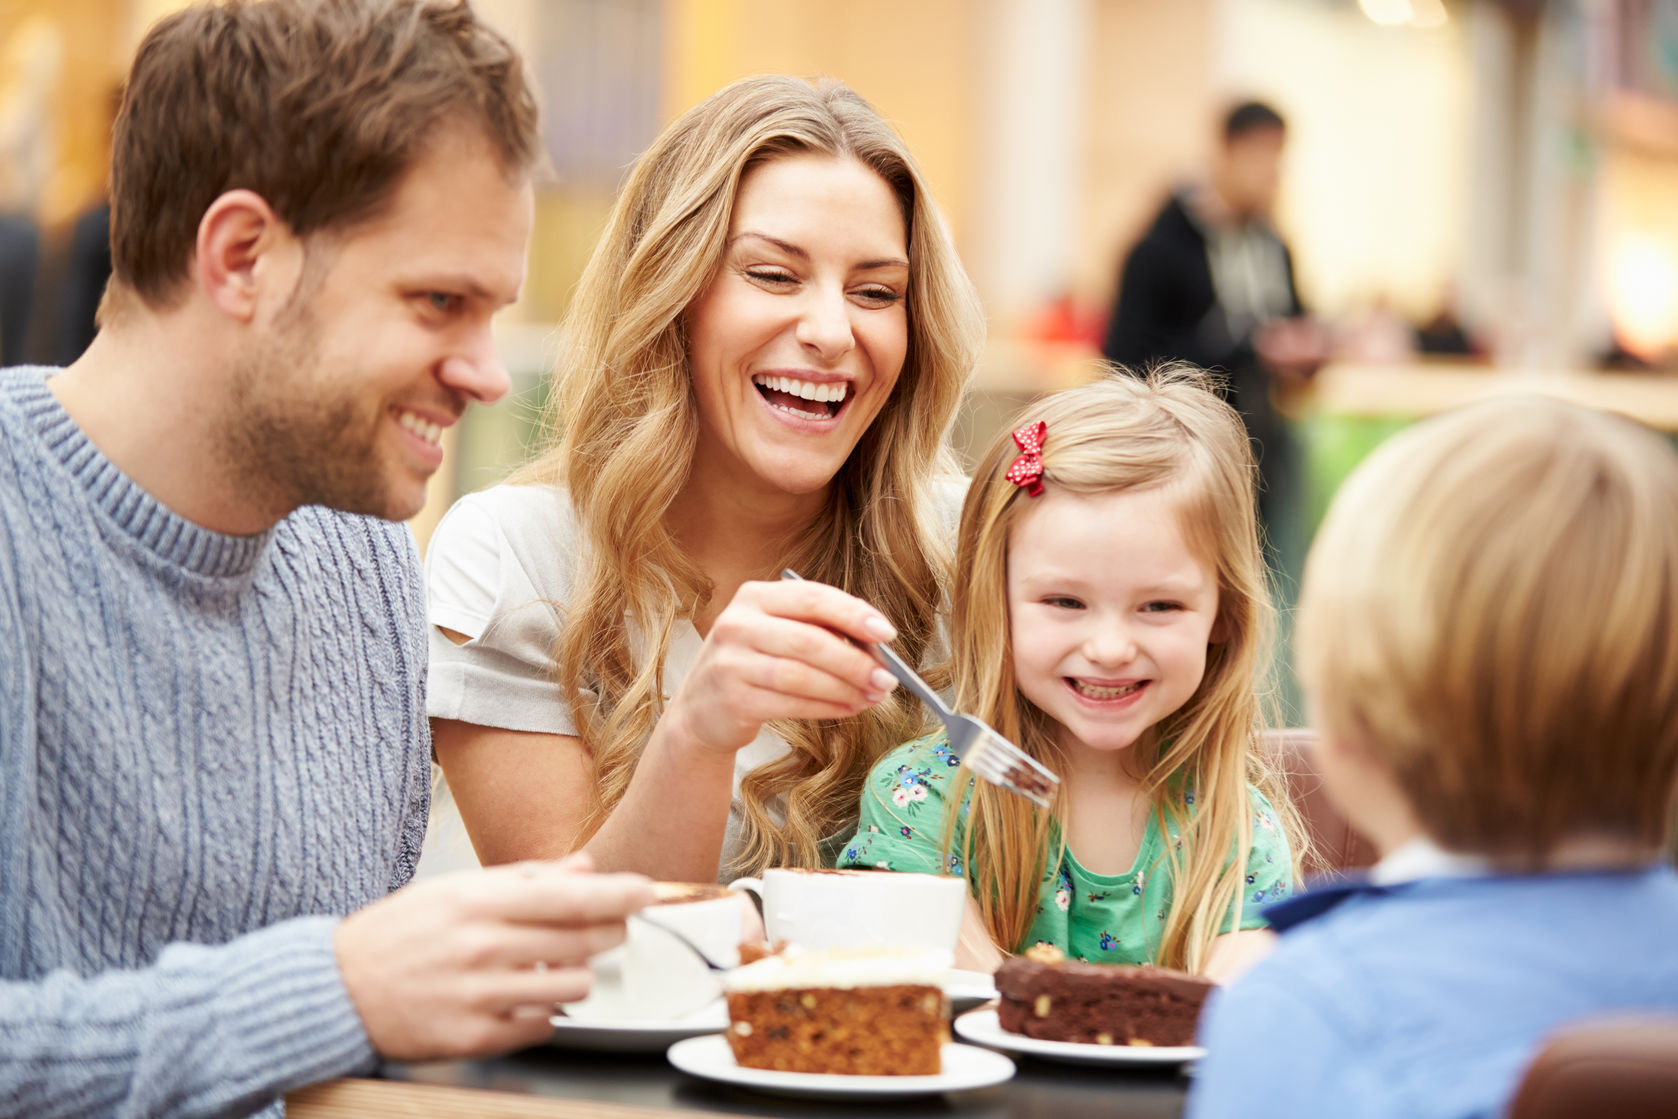 family enjoying snack in cafe together